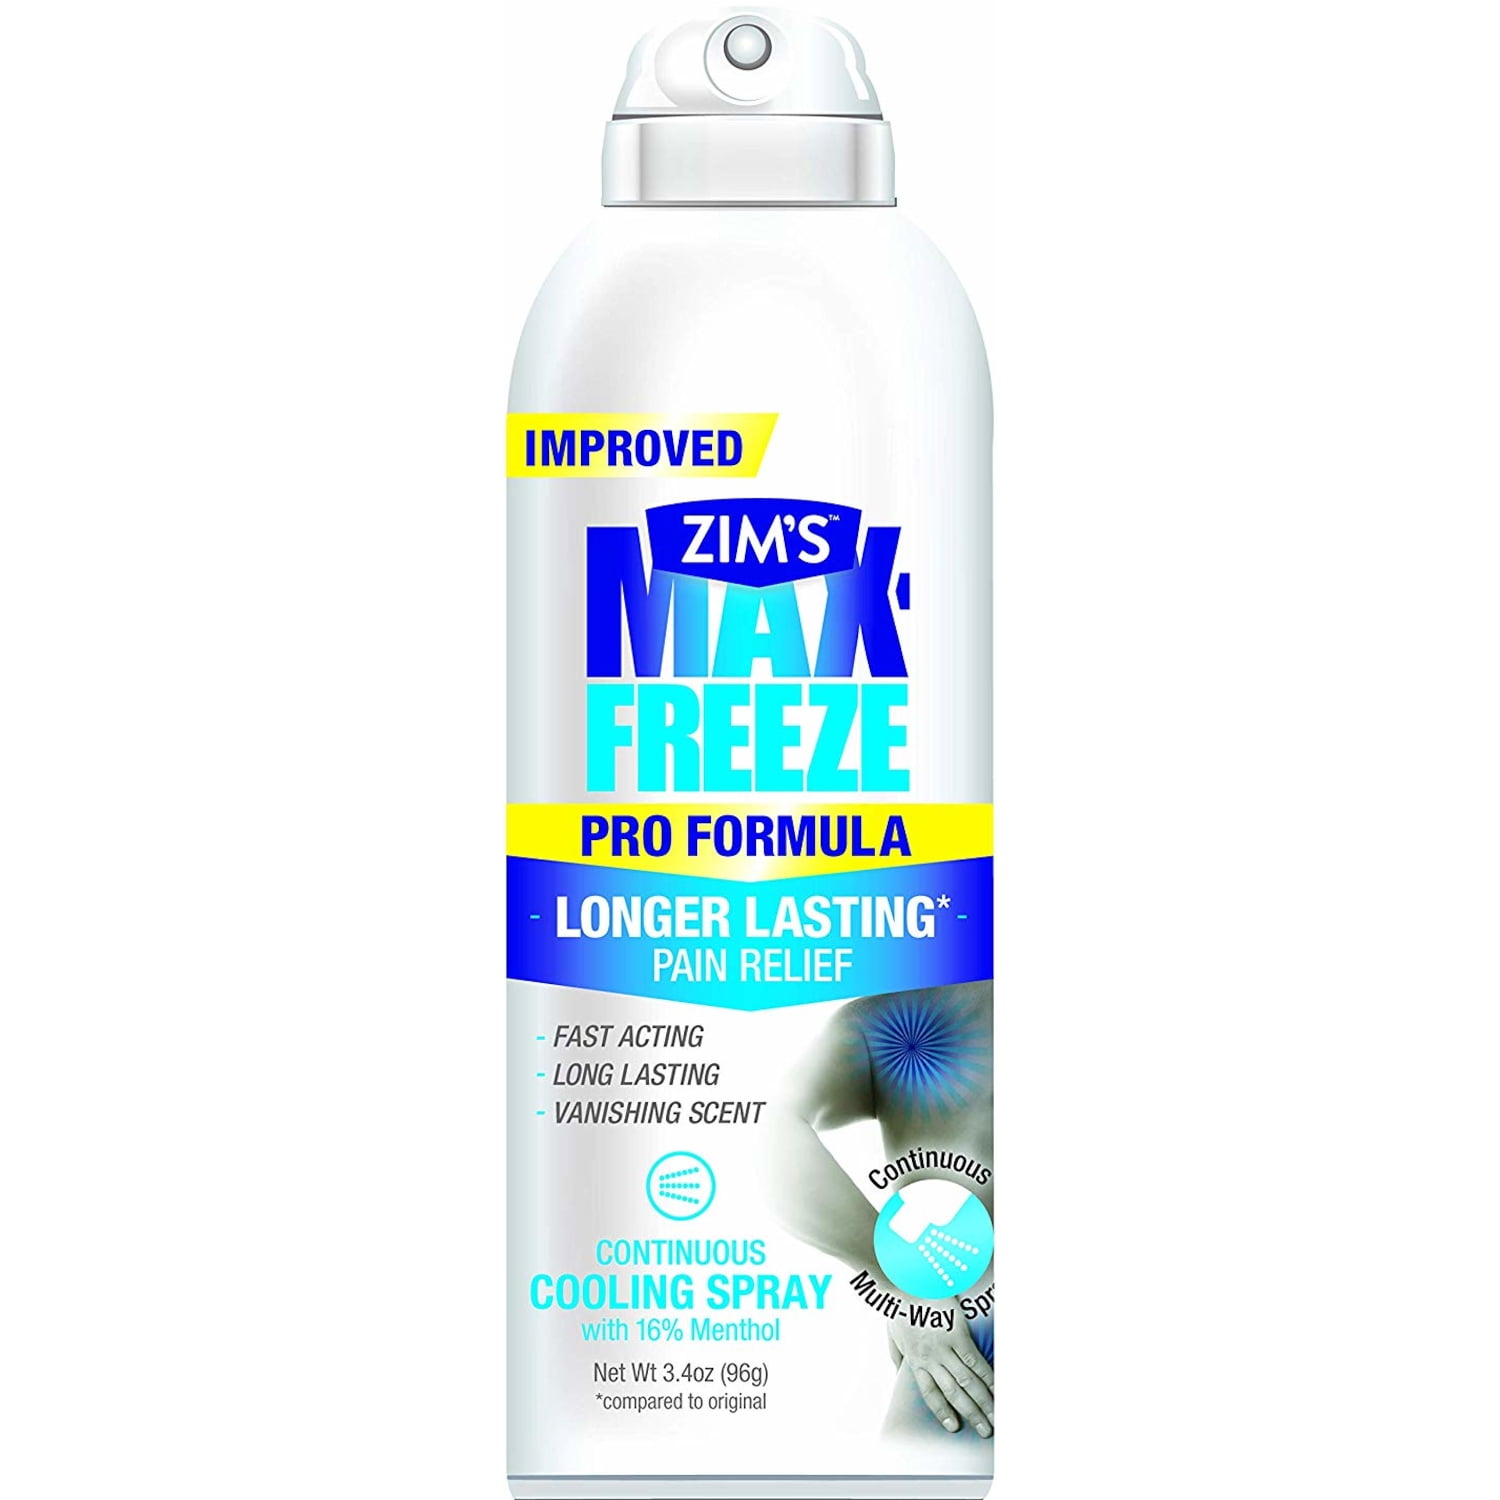 Max freeze. Max-Freeze Zims. Max Freeze мазь. Cooling Spray Gel Freeze. Pain Relief Now спрей.